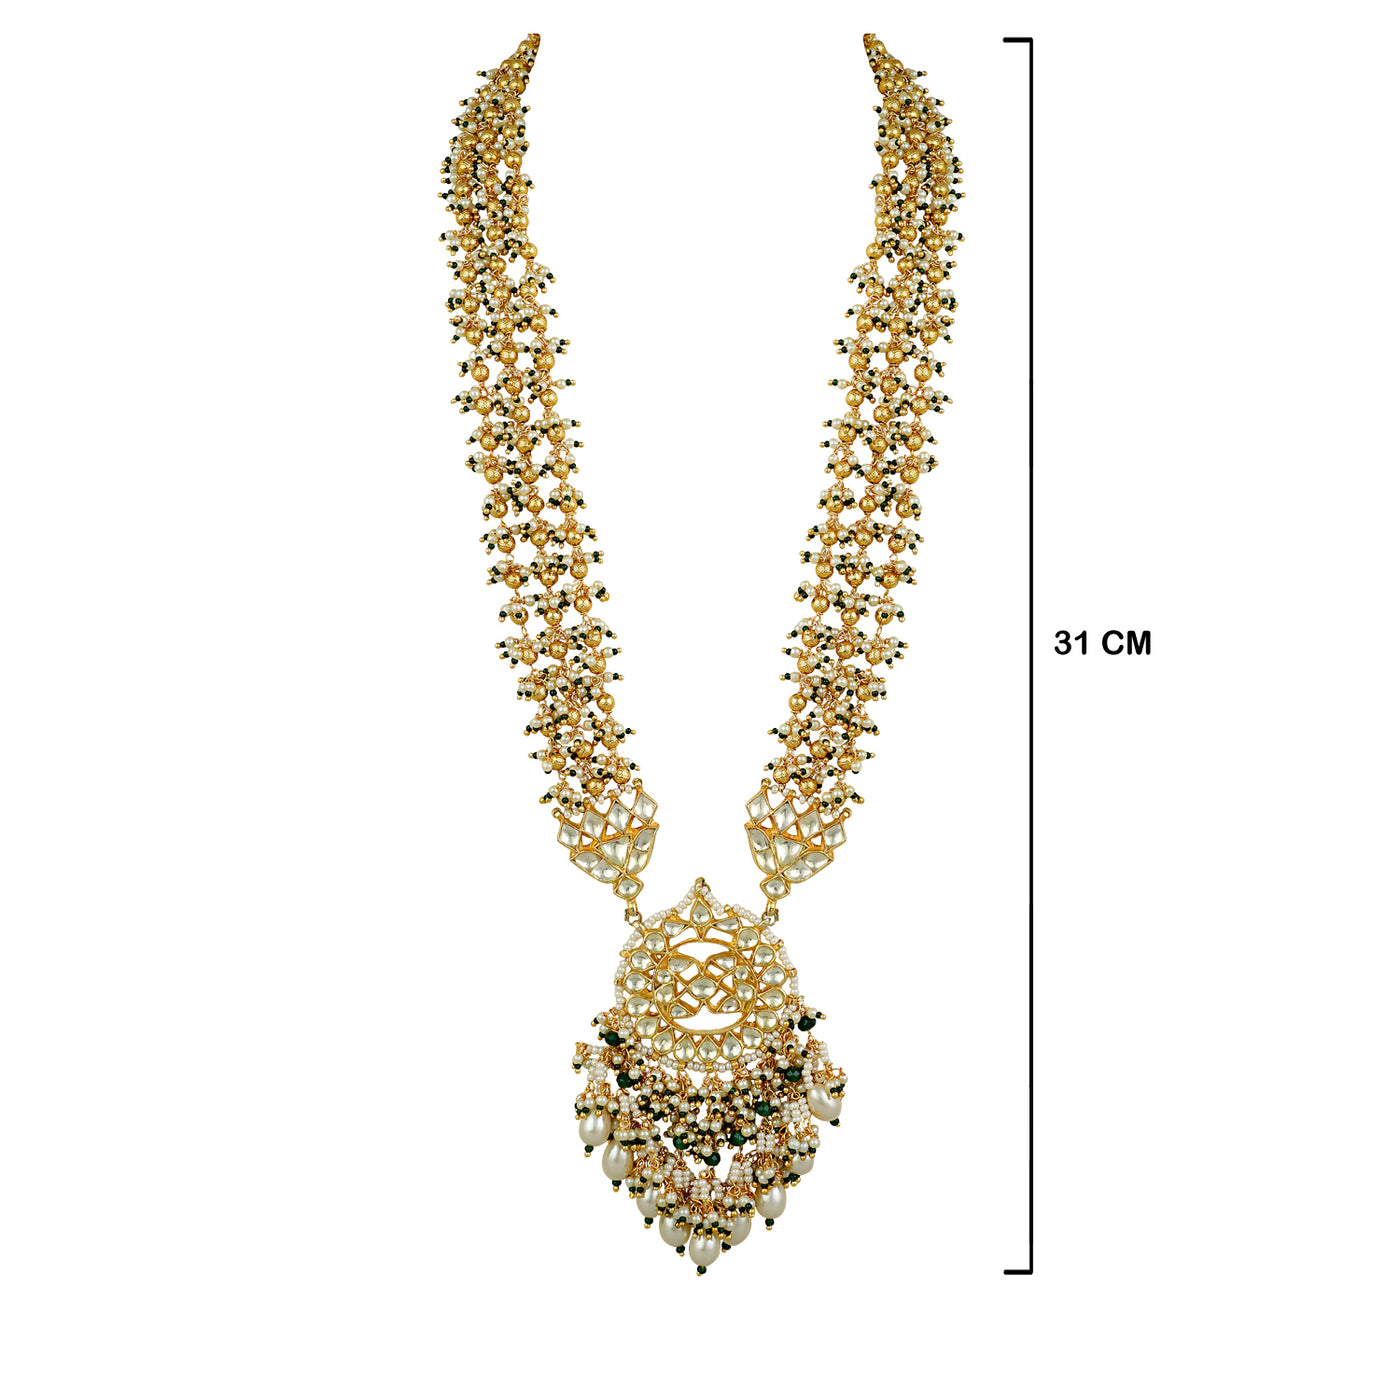 Beaded Kundan Long Necklace with measurements in cm. 31cm in length.